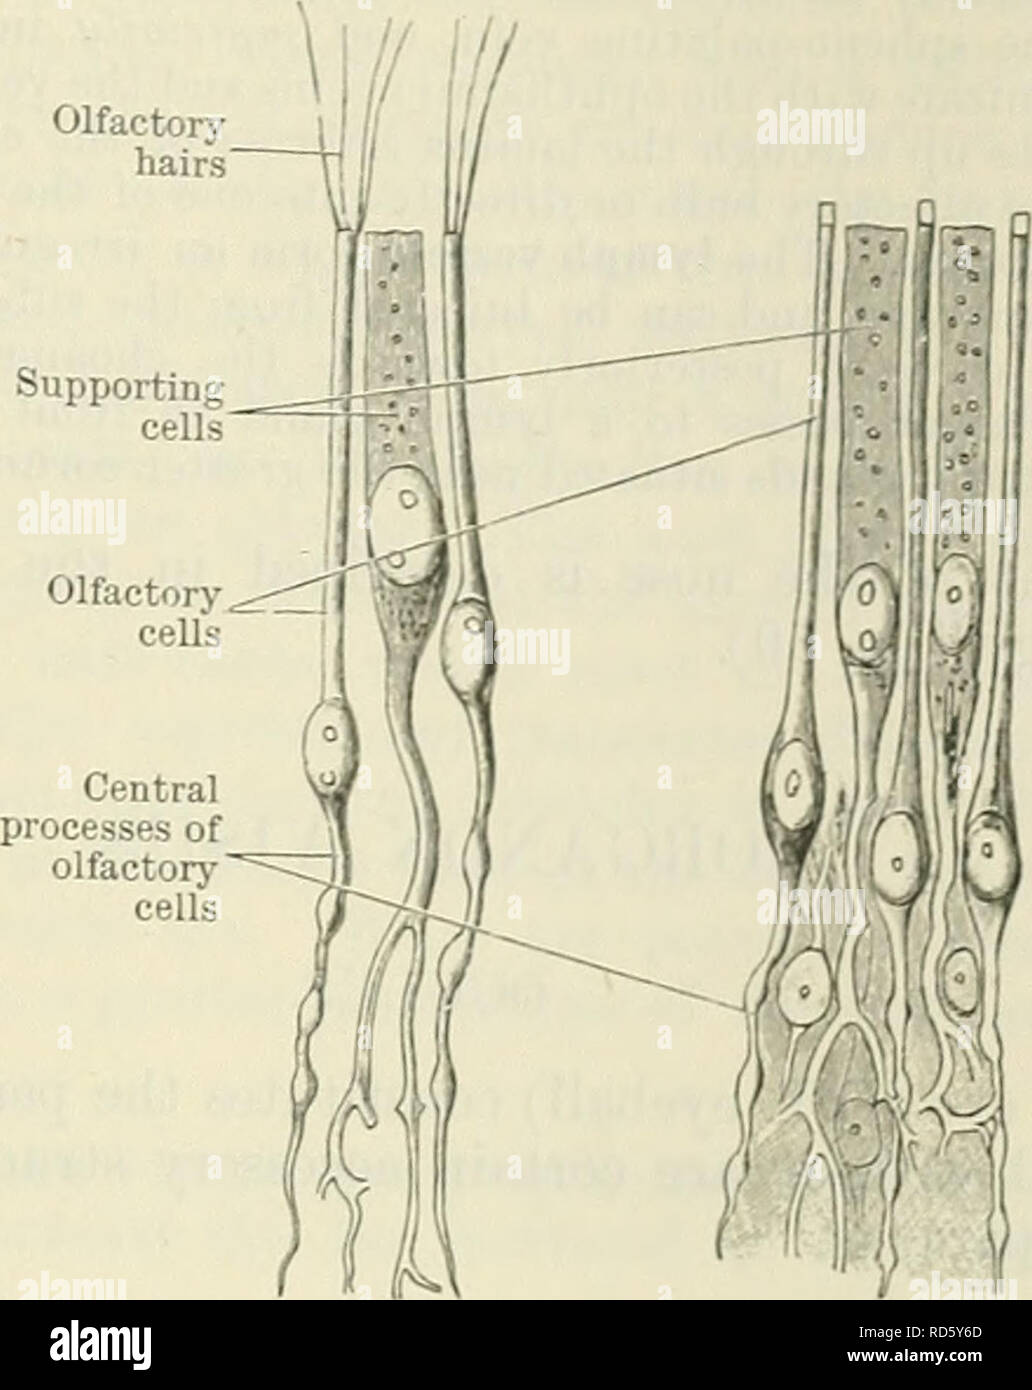 . Cunningham's Text-book of anatomy. Anatomy. factory hairs Peripheral &quot;process B Body of -cell &quot;with Central process Fig. 676.âOlfactory and Supporting Cells. B. HuÂ°maU } M- Schultze. G- Human (â¼â¢ Brunn). iSxASAL CAVITY. 805 eUipS6 of ovalCen^Pf T^d Â°r branChed Pr0Cesses' These c^s contain par?s of the cells Zf) ^ **? Sltuated at the deeP ends of ^ columnar i^Â£:^^L m what is termed the of this columnar epithel- ium is covered by a thin limiting membrane. 2. Olfactory Cells. â These are bipolar nerve-cells, the central processes of which are continued as the axons of the olfacto Stock Photo